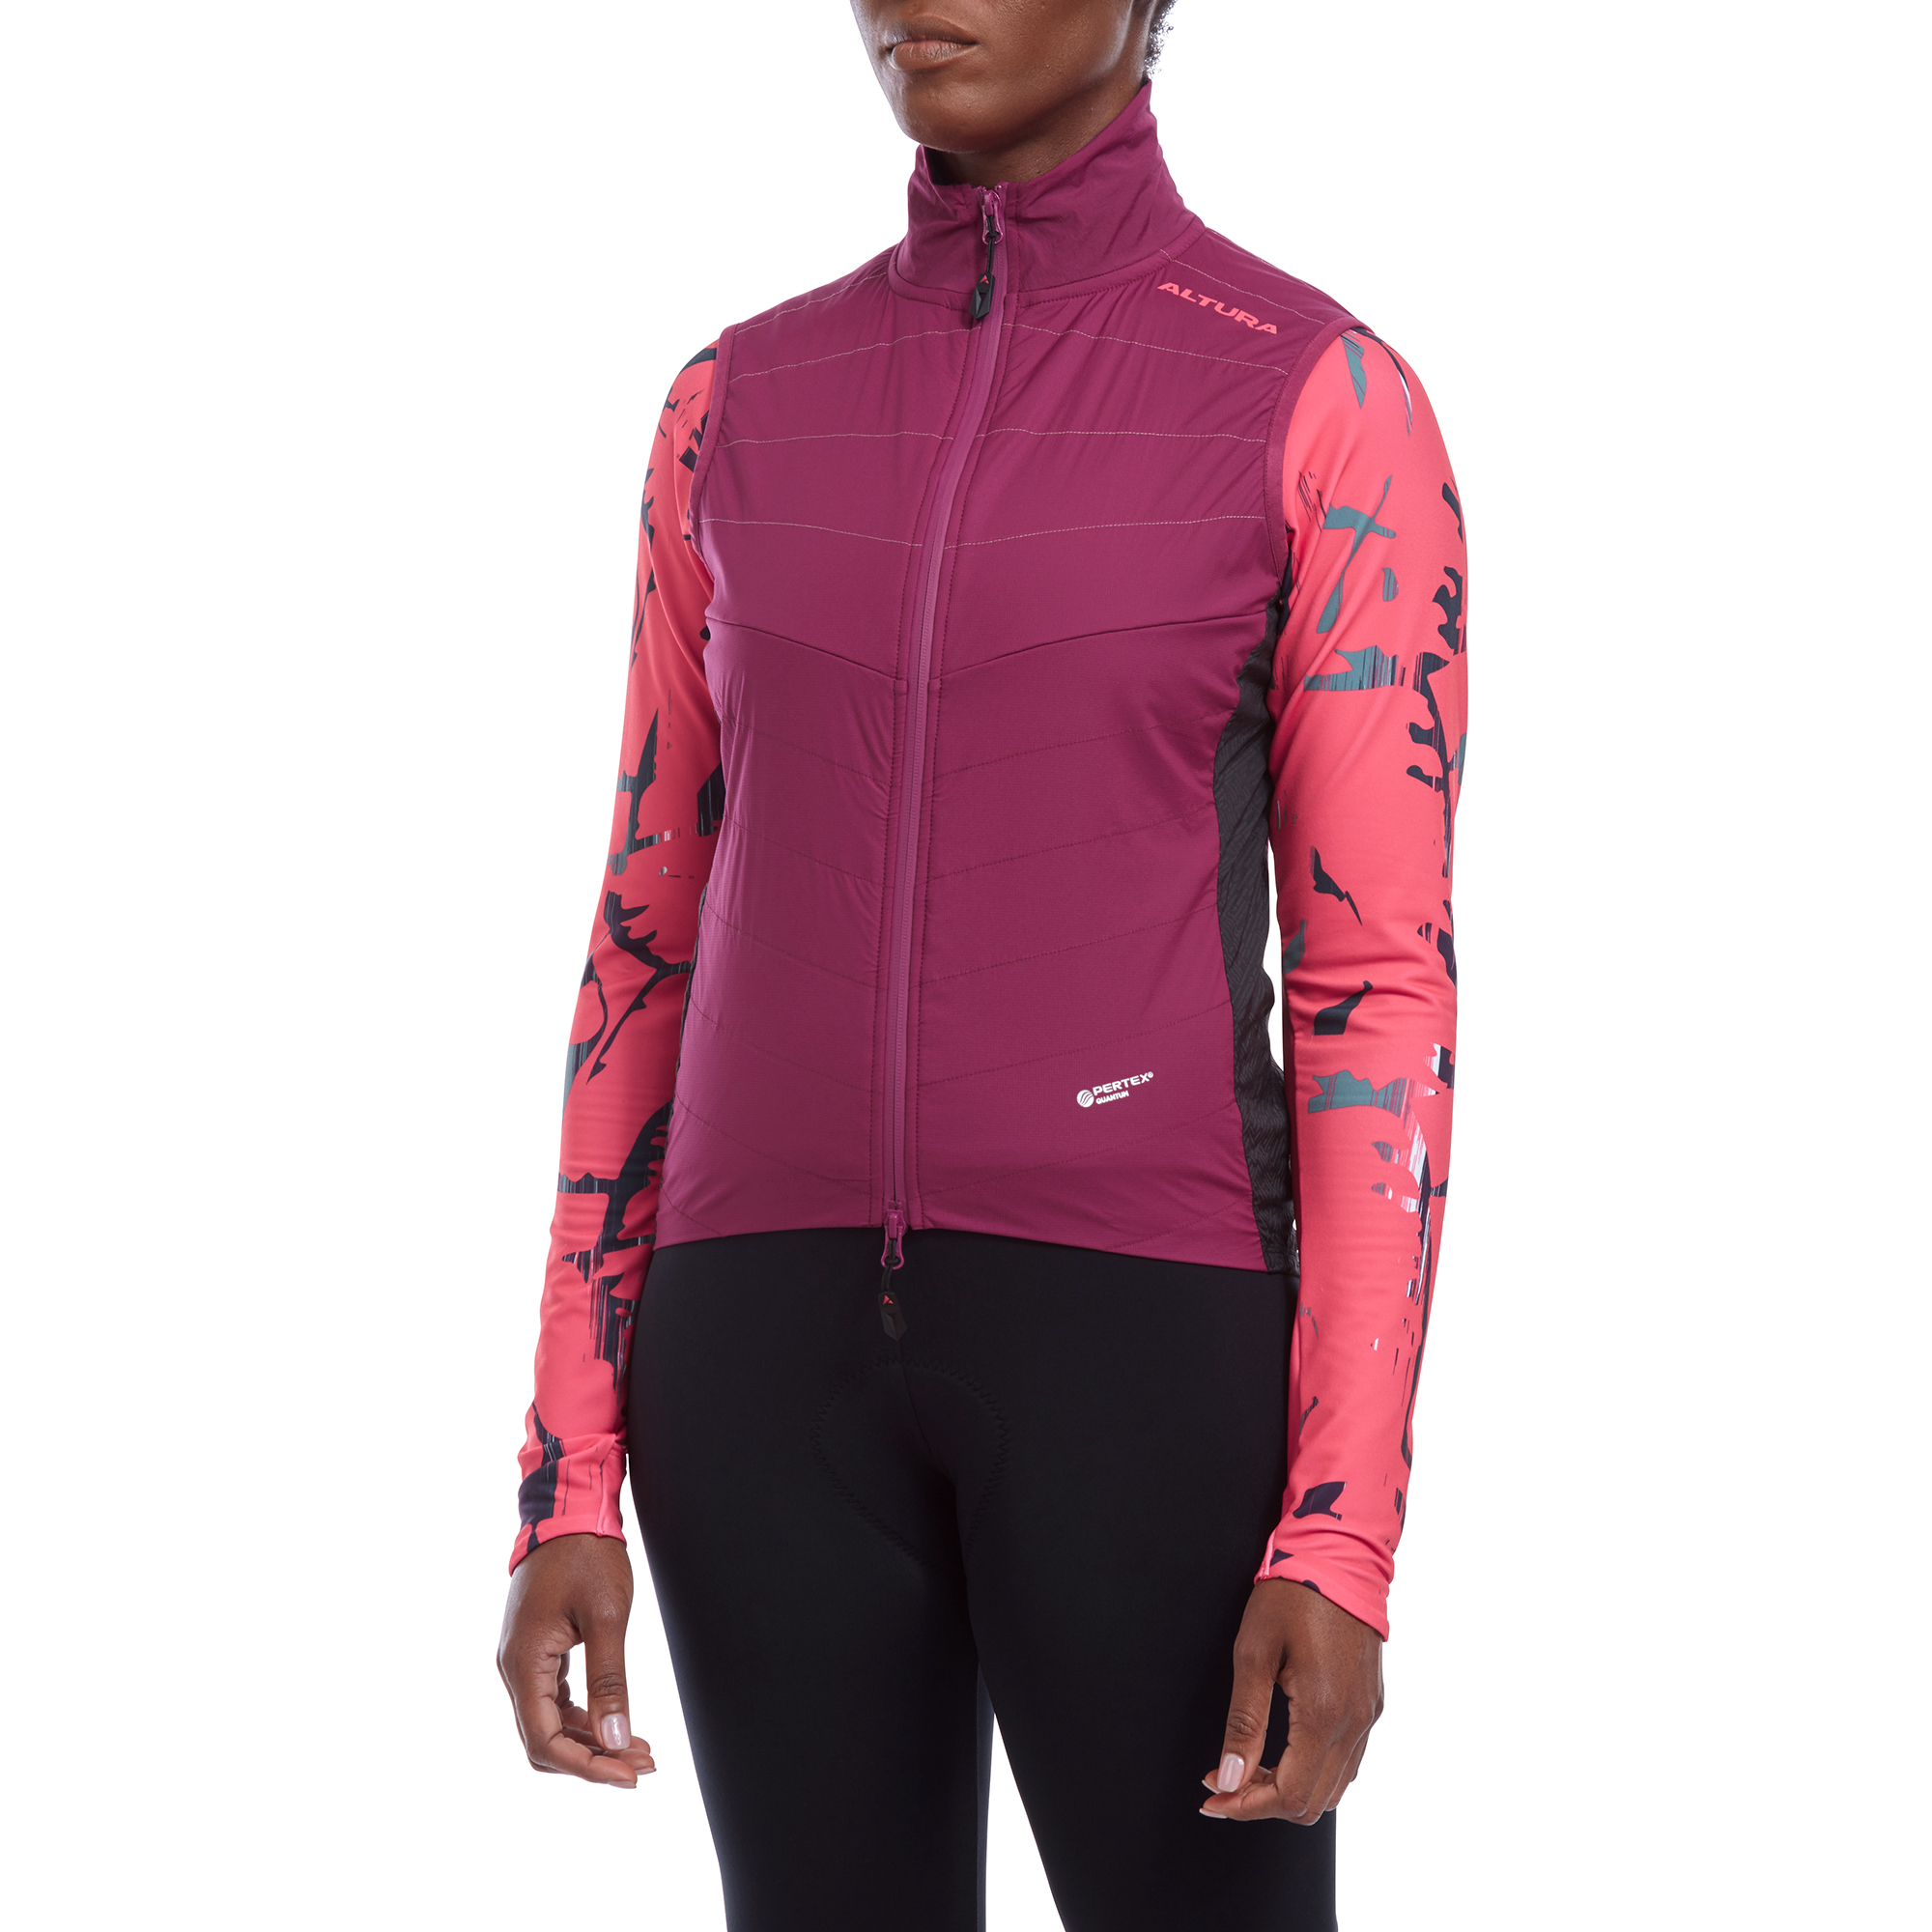 ALTURA ICON ROCKET WOMEN'S INSULATED PACKABLE GILET - The Bike Factory